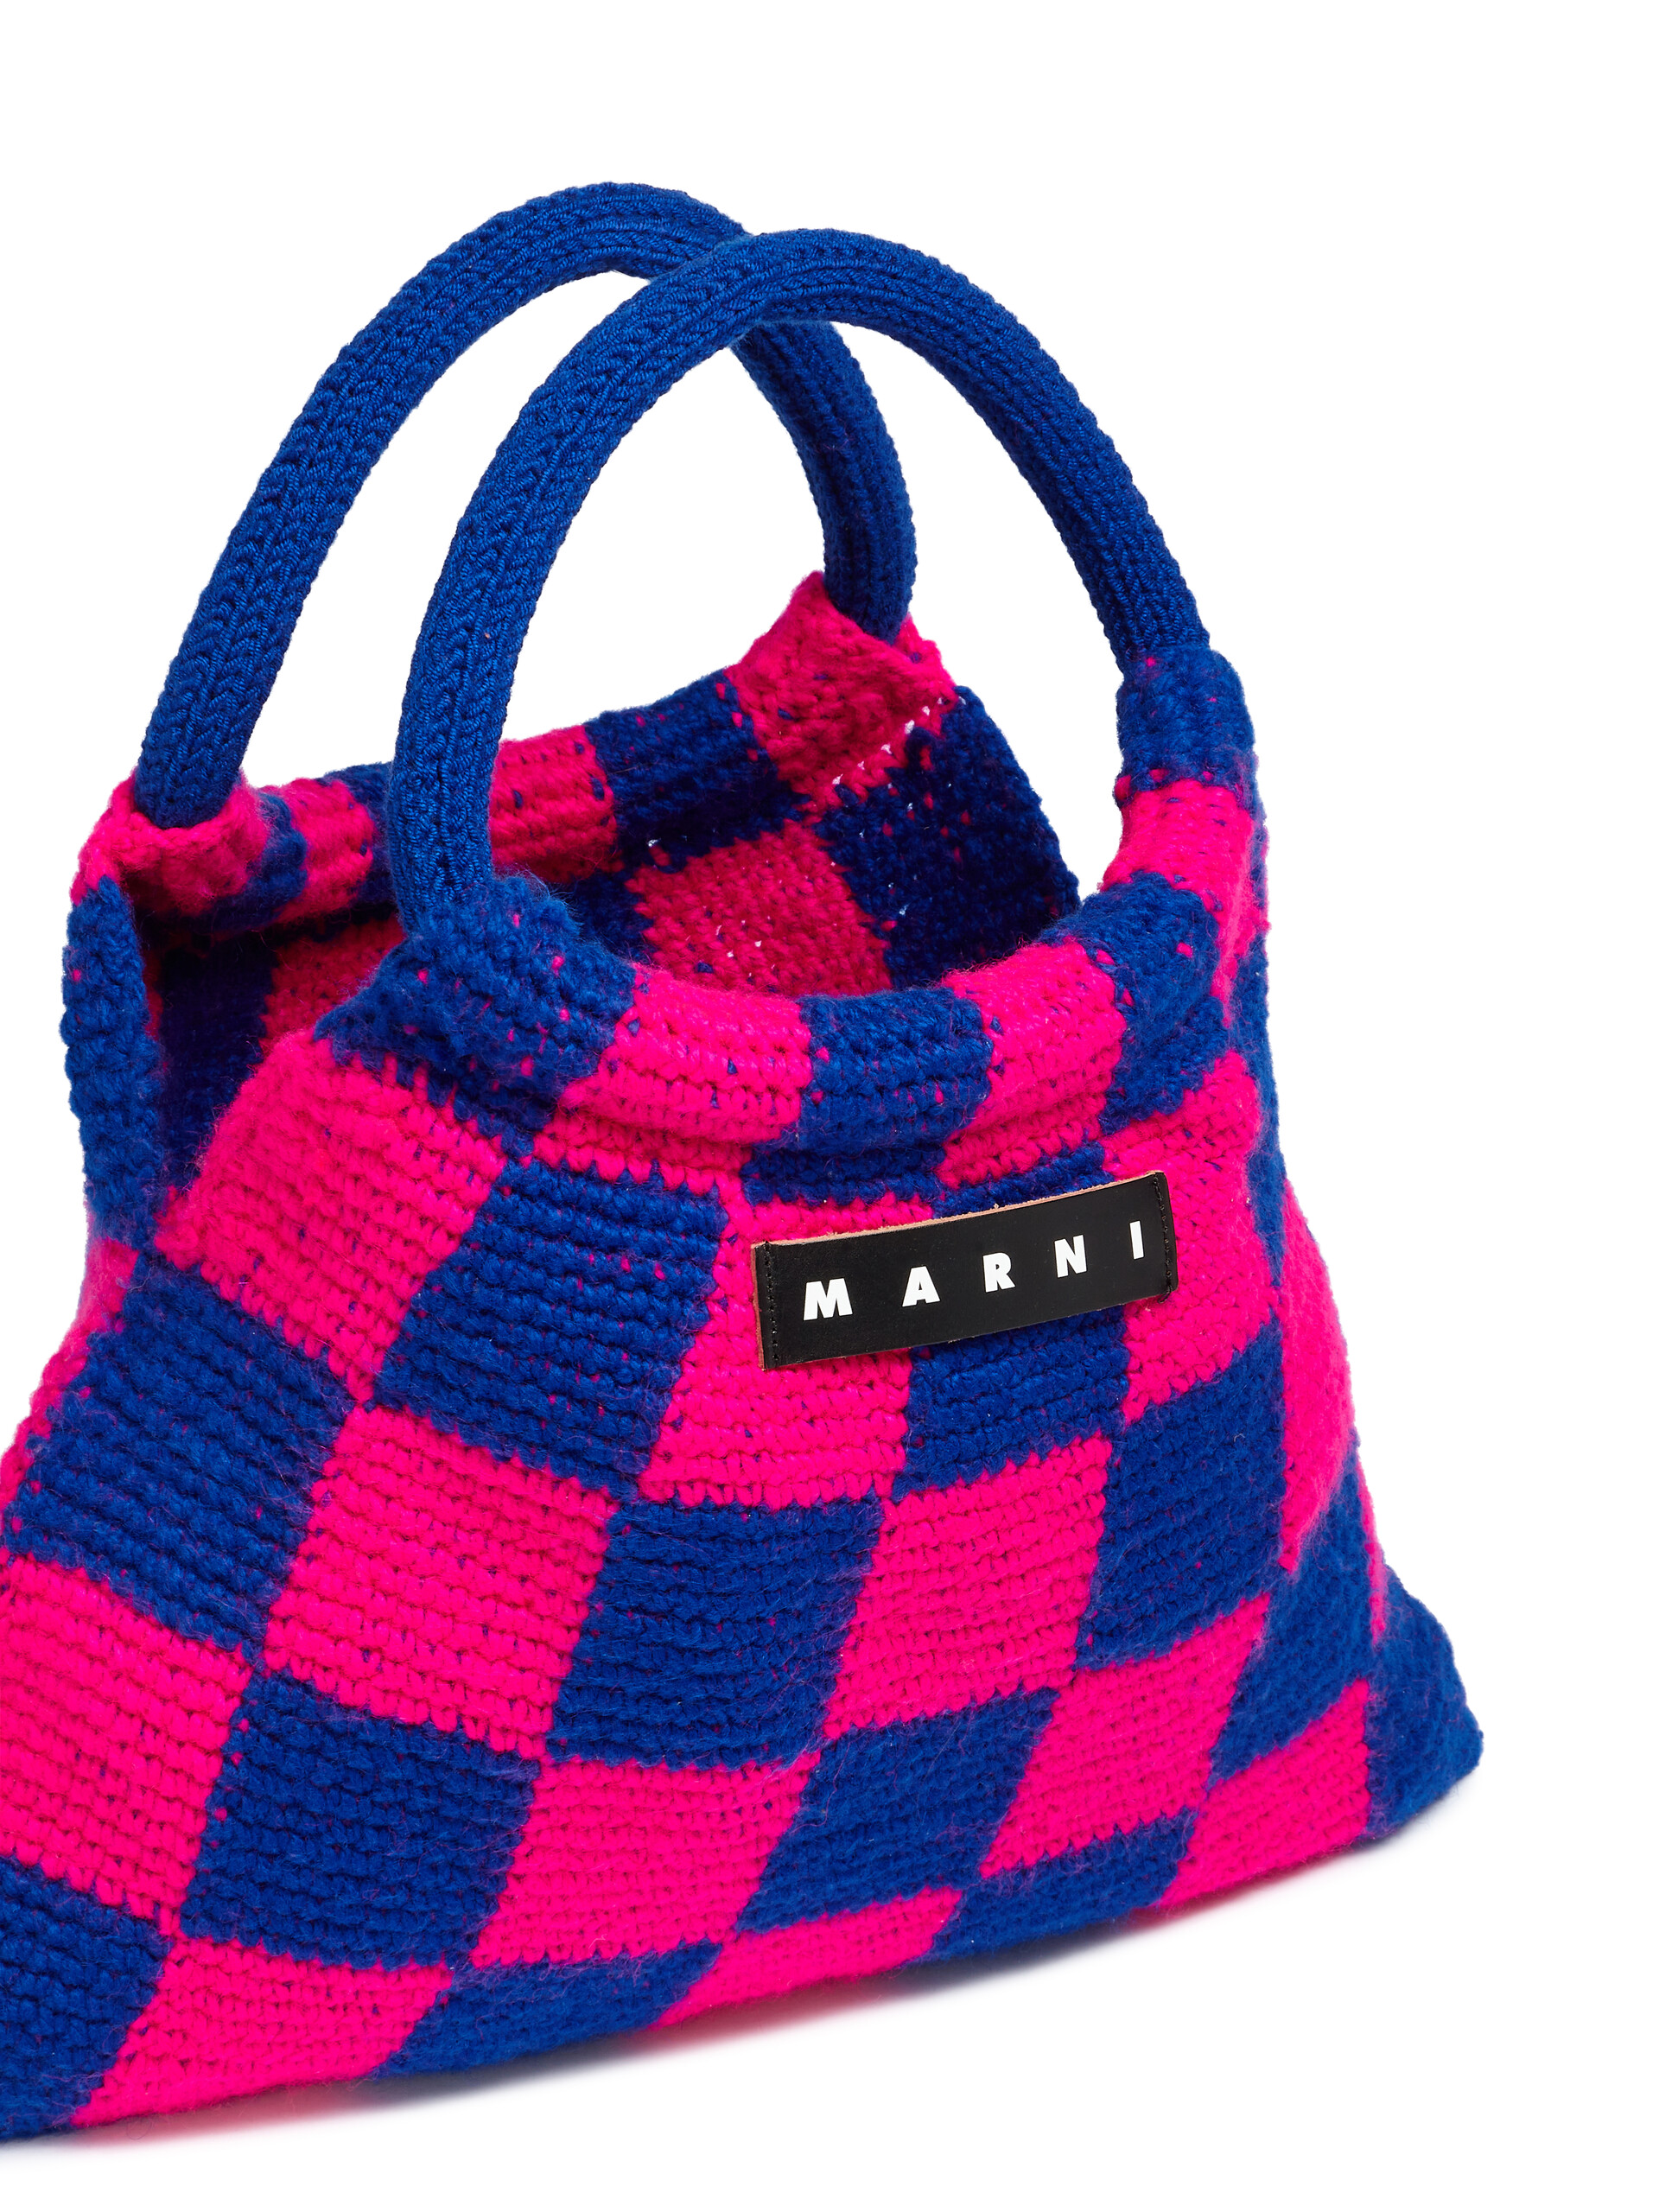 MARNI MARKET GRANNY bag in pink and blue crochet - Shopping Bags - Image 4